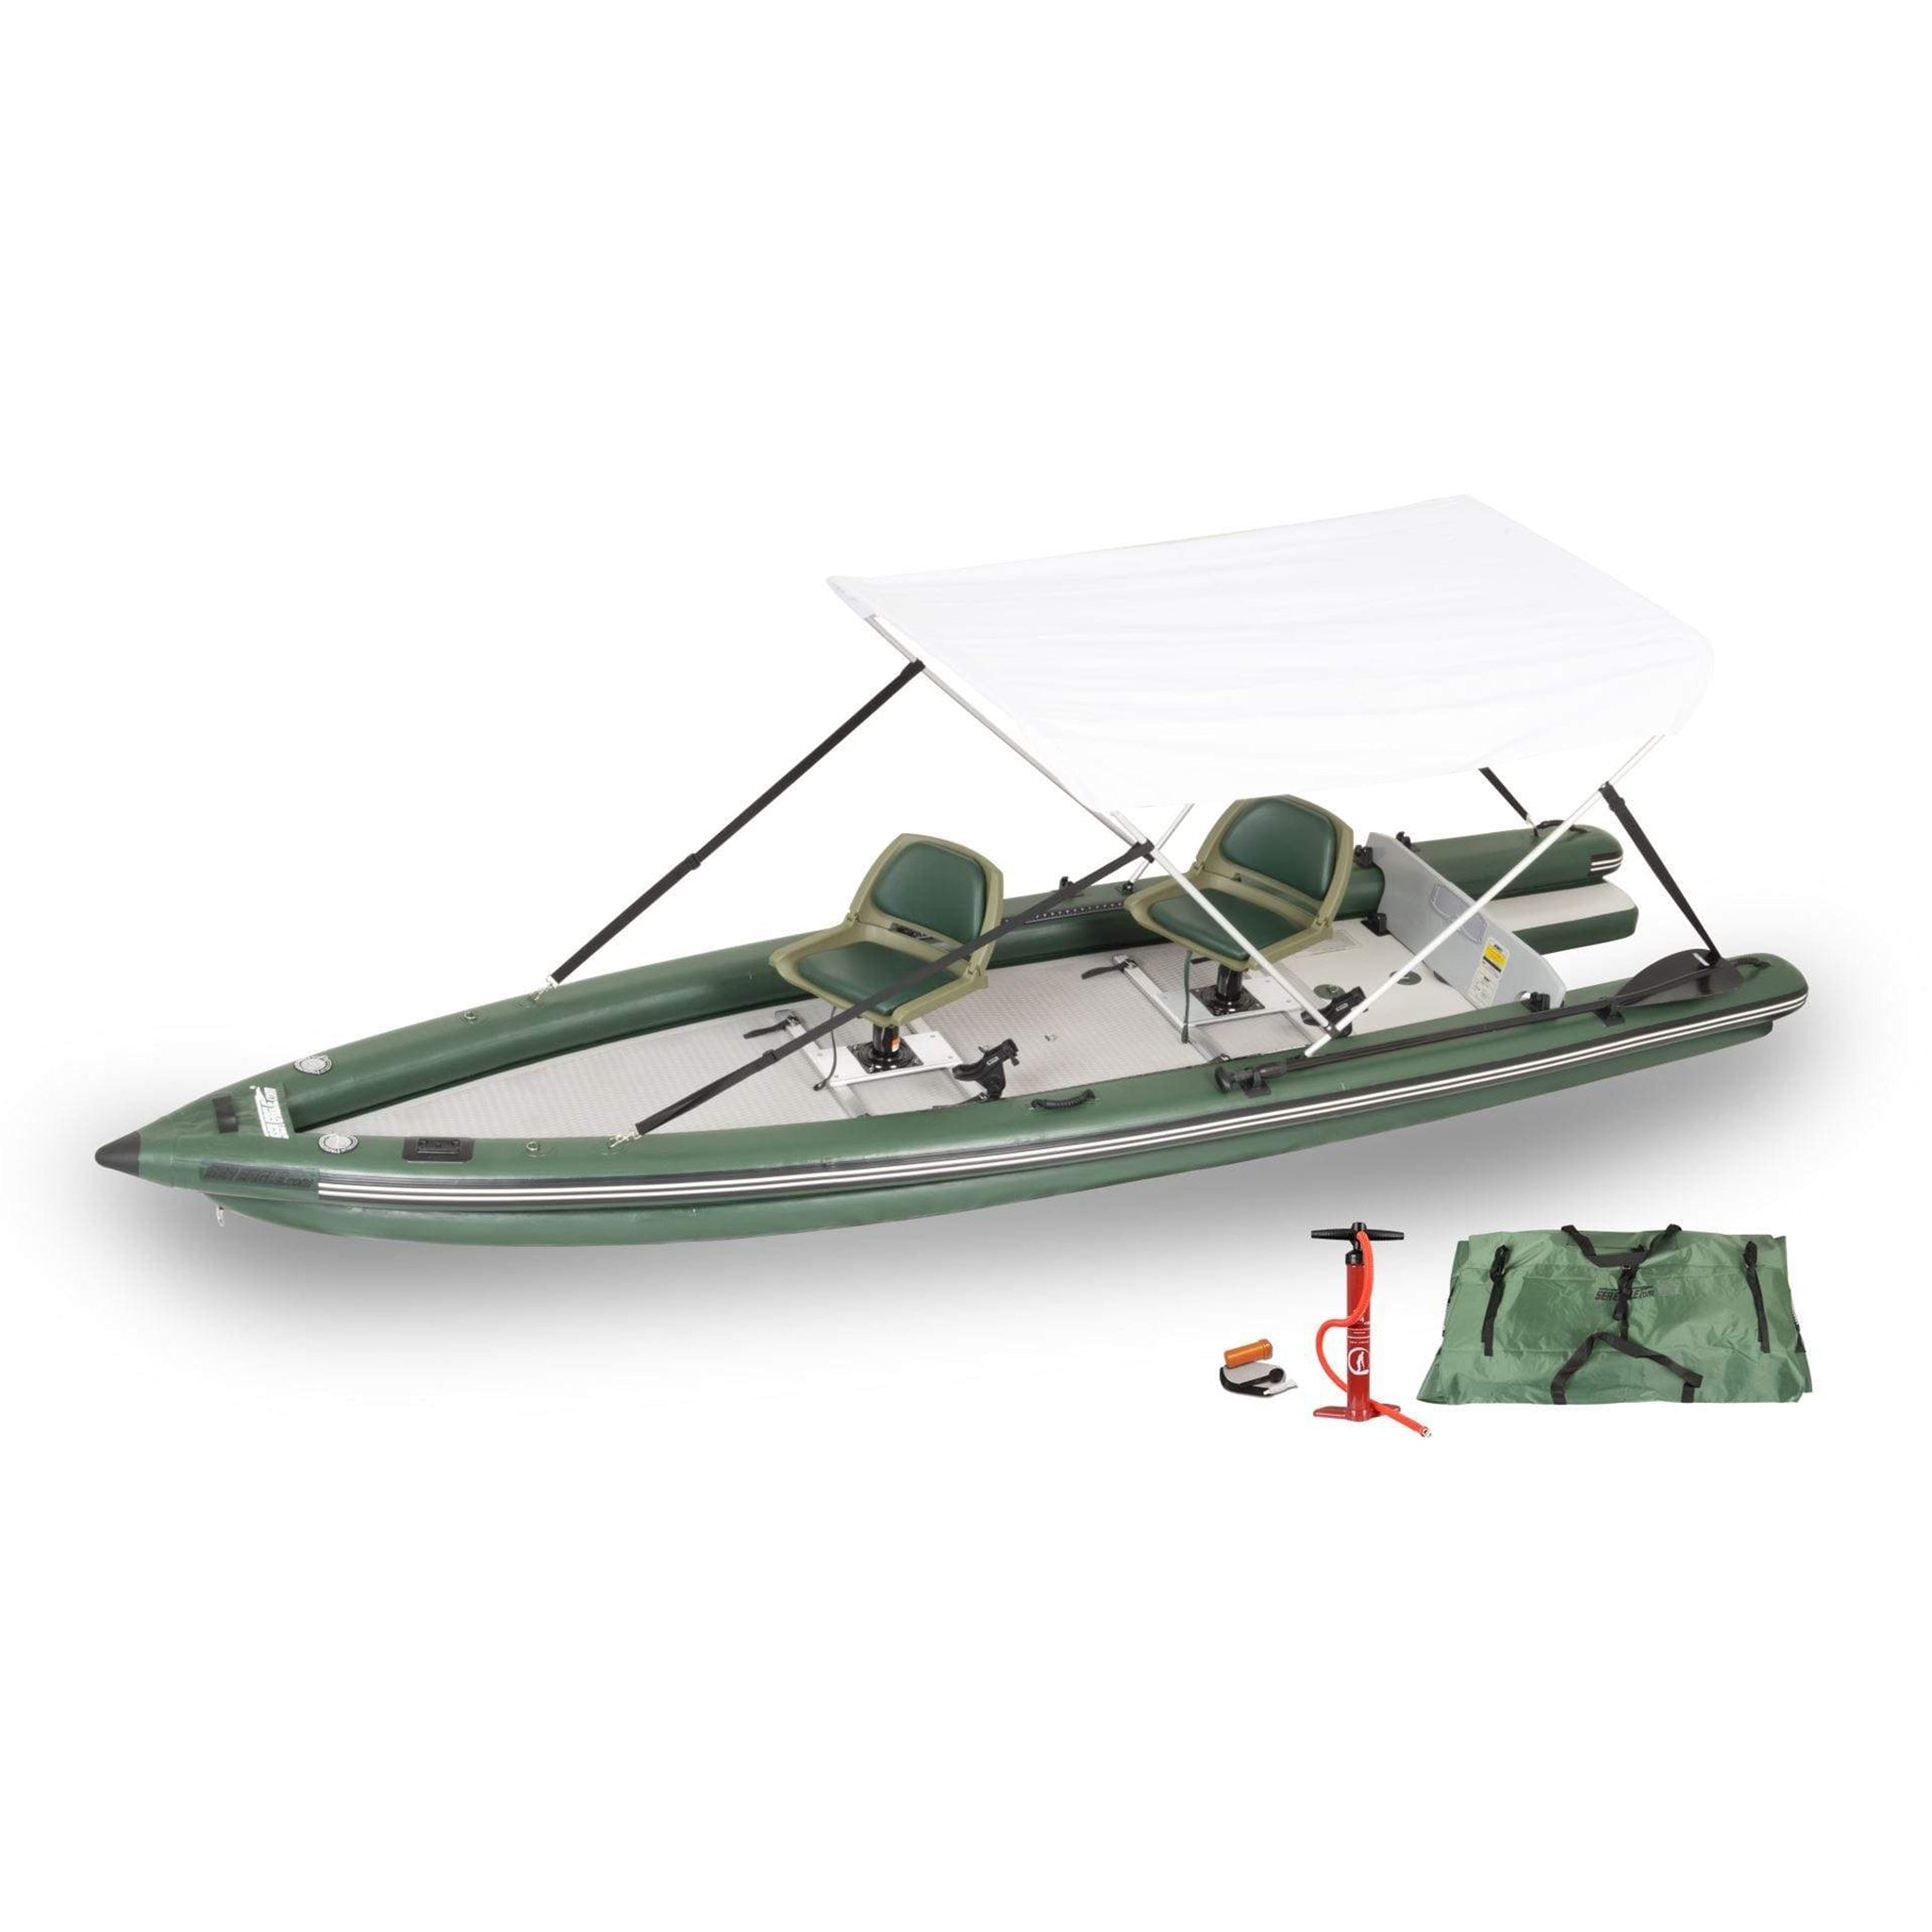 Live Bait and Tackle — Boat Parts, Boat Service, Powerboat and Kayak Rentals